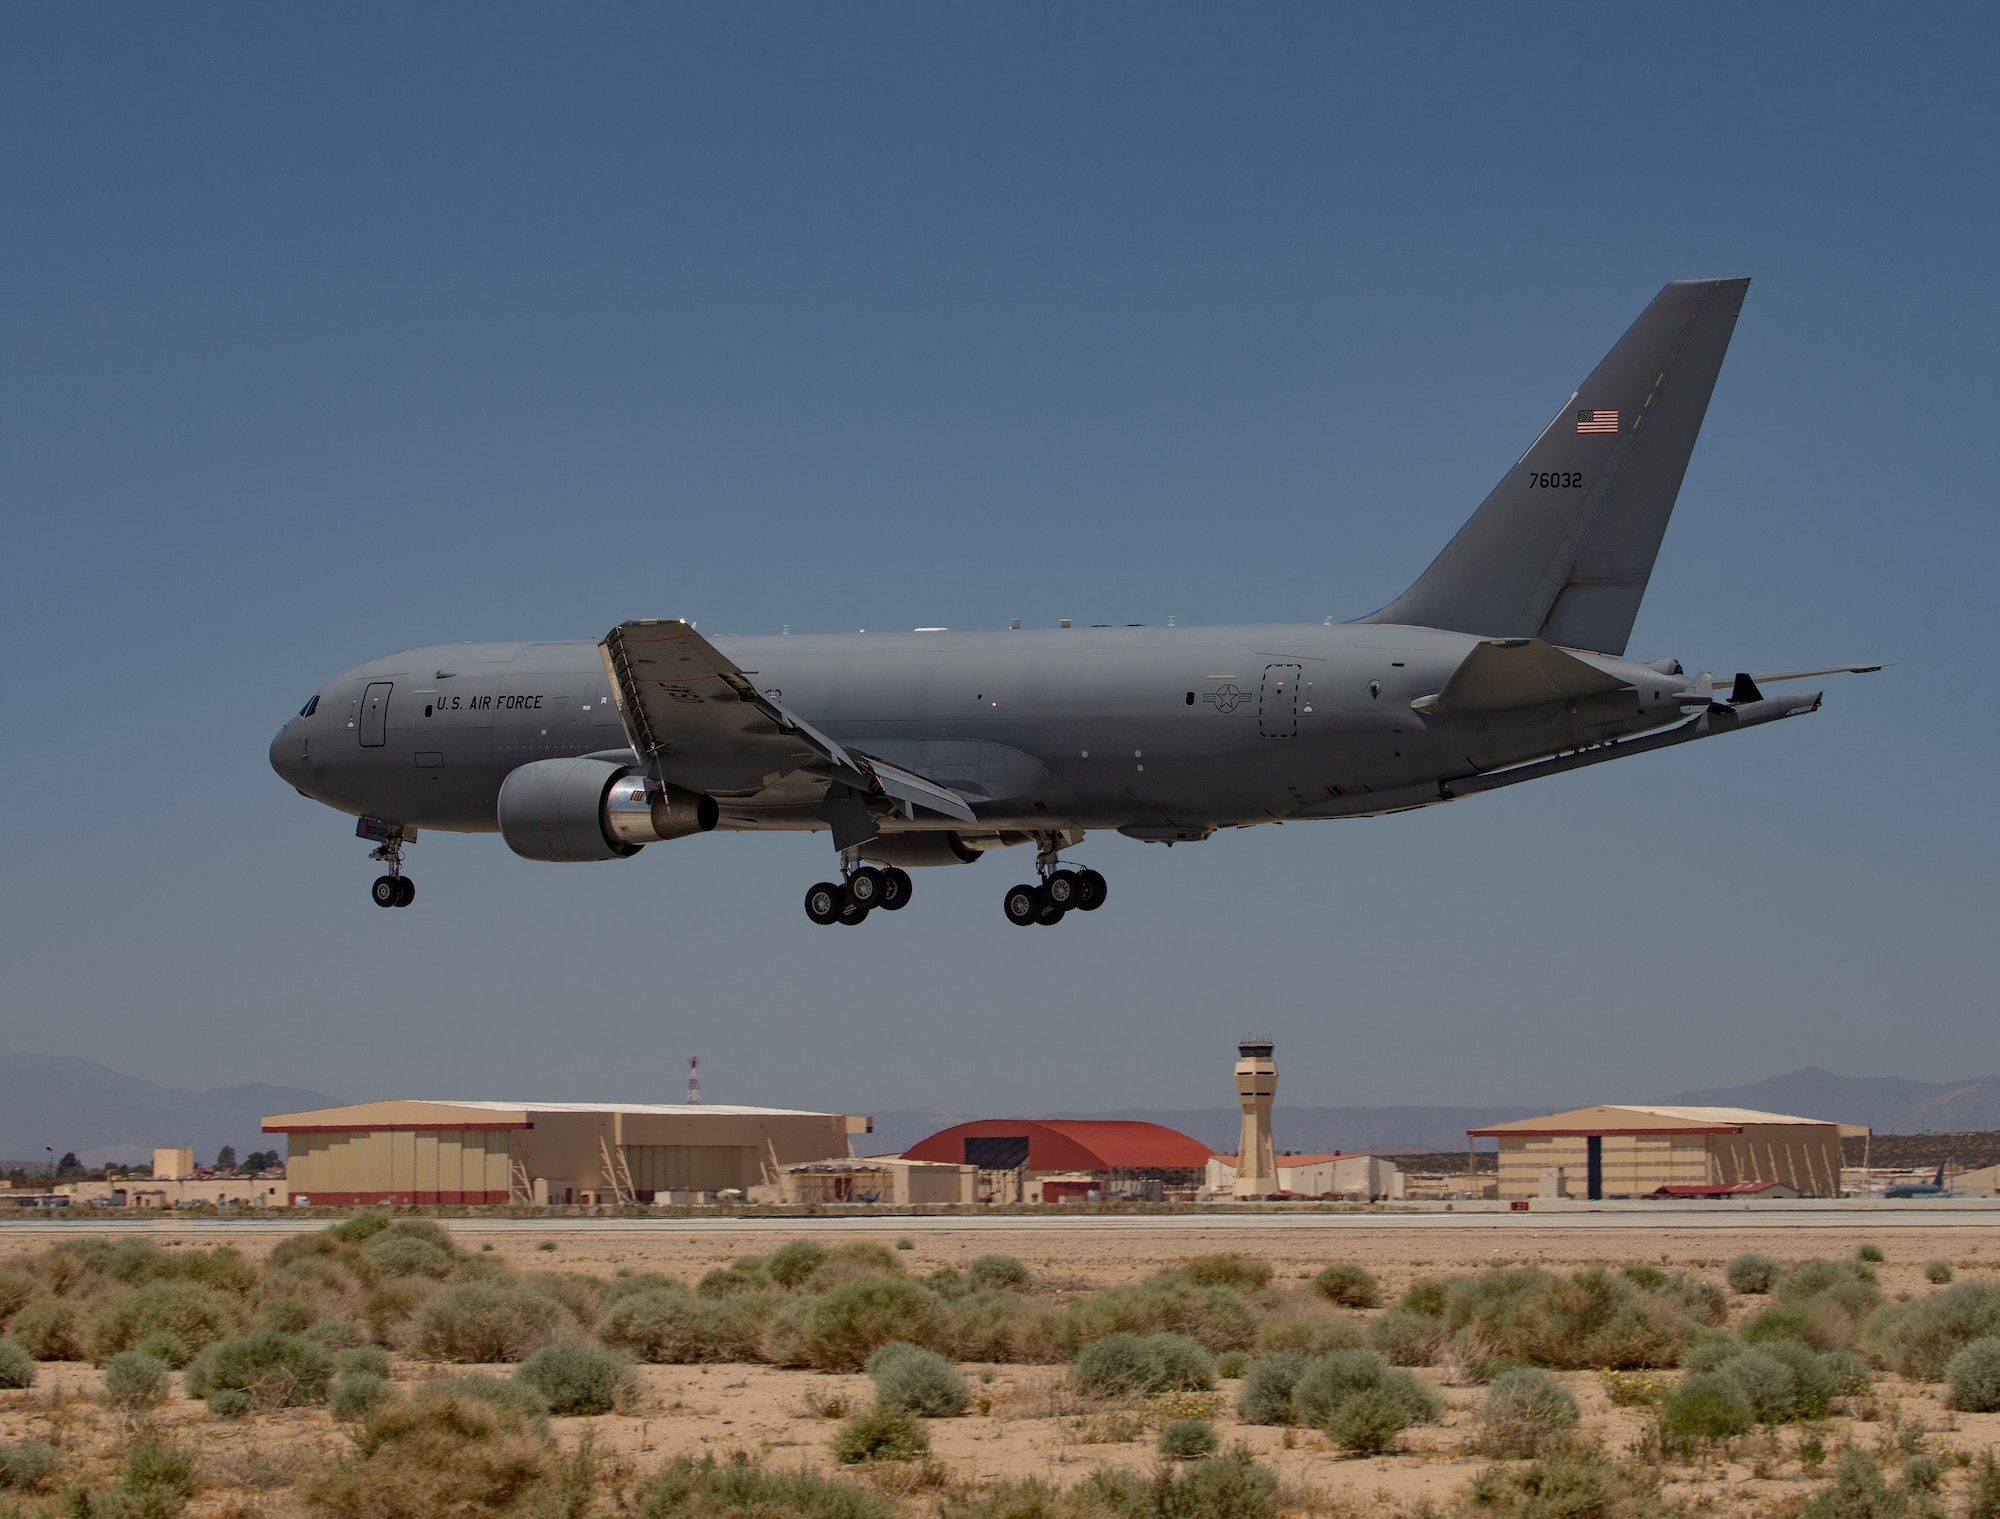 A KC-46 Pegasus assigned to the 22nd Air Refueling Wing out of McConnell Air Force Base, Kansas, lands at Edwards Air Force Base, California, May 11. Edwards AFB was able to receive the aircraft after only a few hours' notice. (Air Force photo by Todd Schannuth)